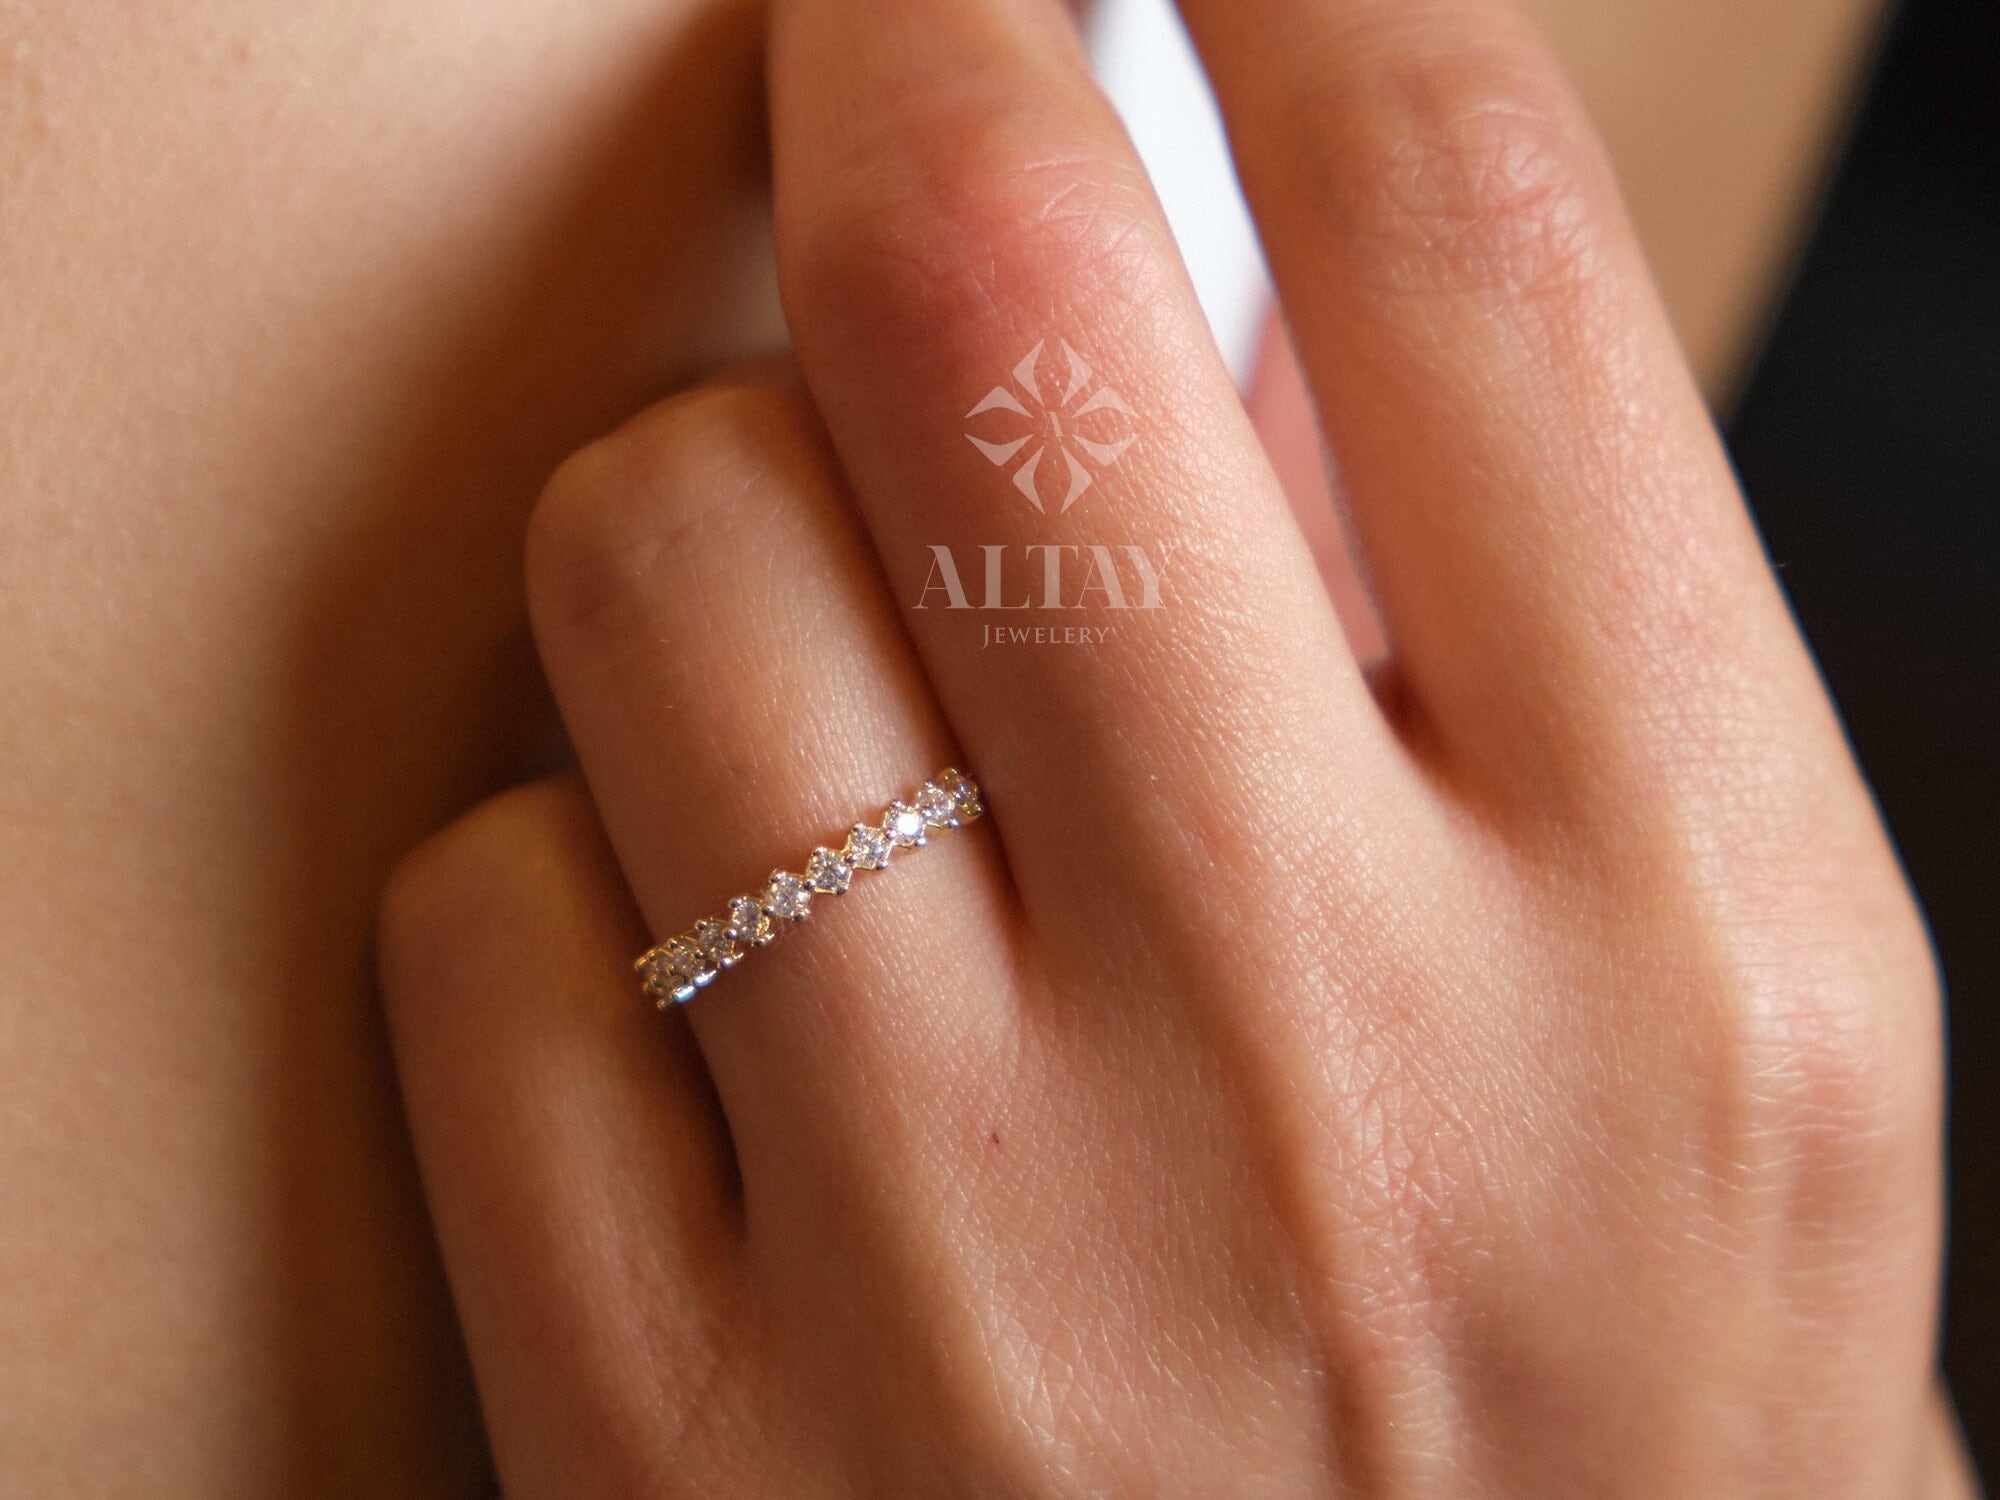 14K Gold Half Eternity Ring, Minimalist Marriage Ring, Multi Stone Bridal Band, Prong Setting Promise Ring, Dainty Stacking Gold Ring